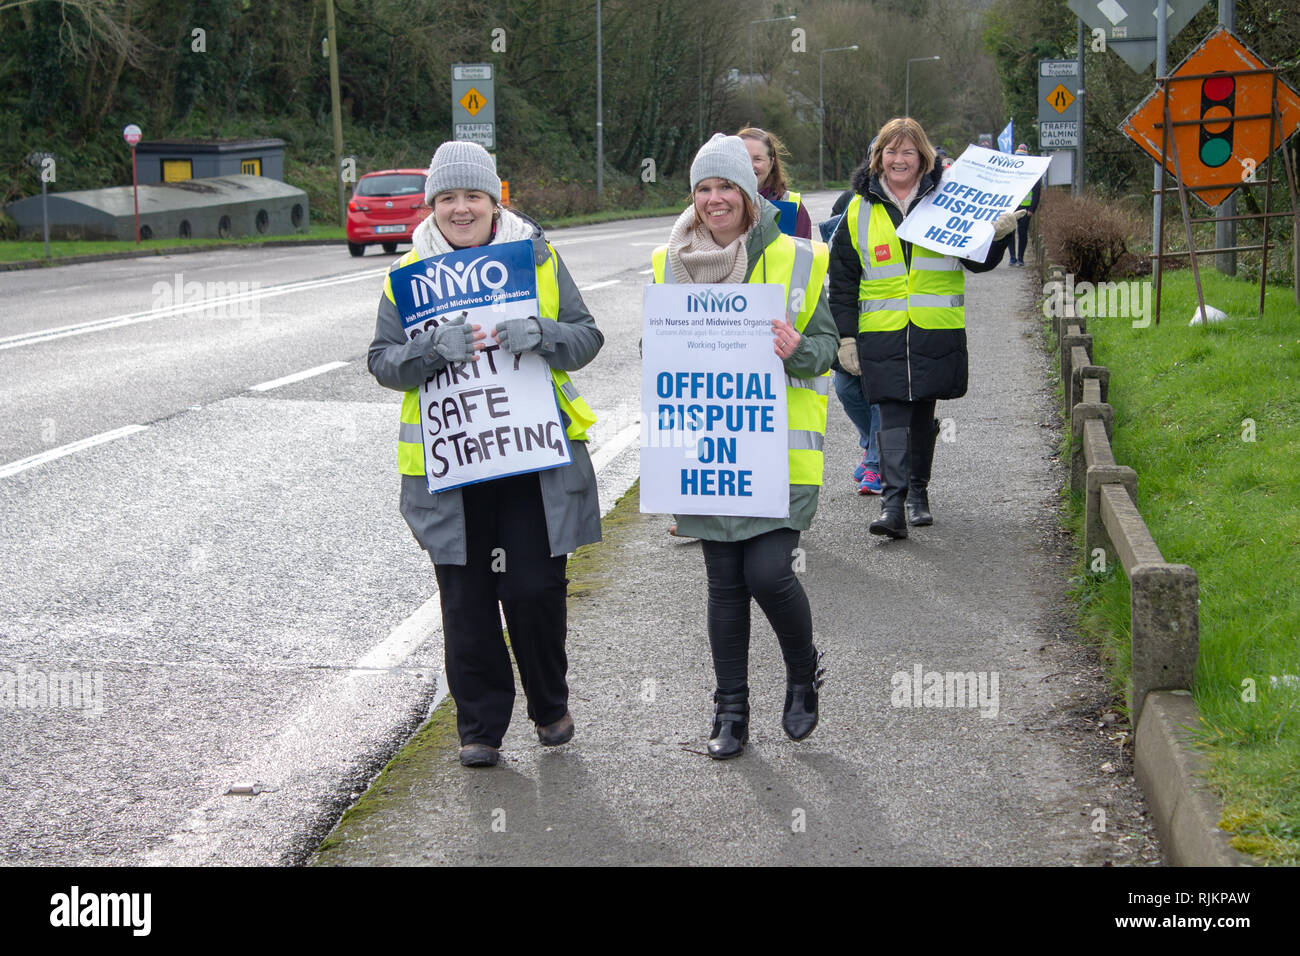 Irish nurses taking industrial action on a picket line over pay claim Stock Photo